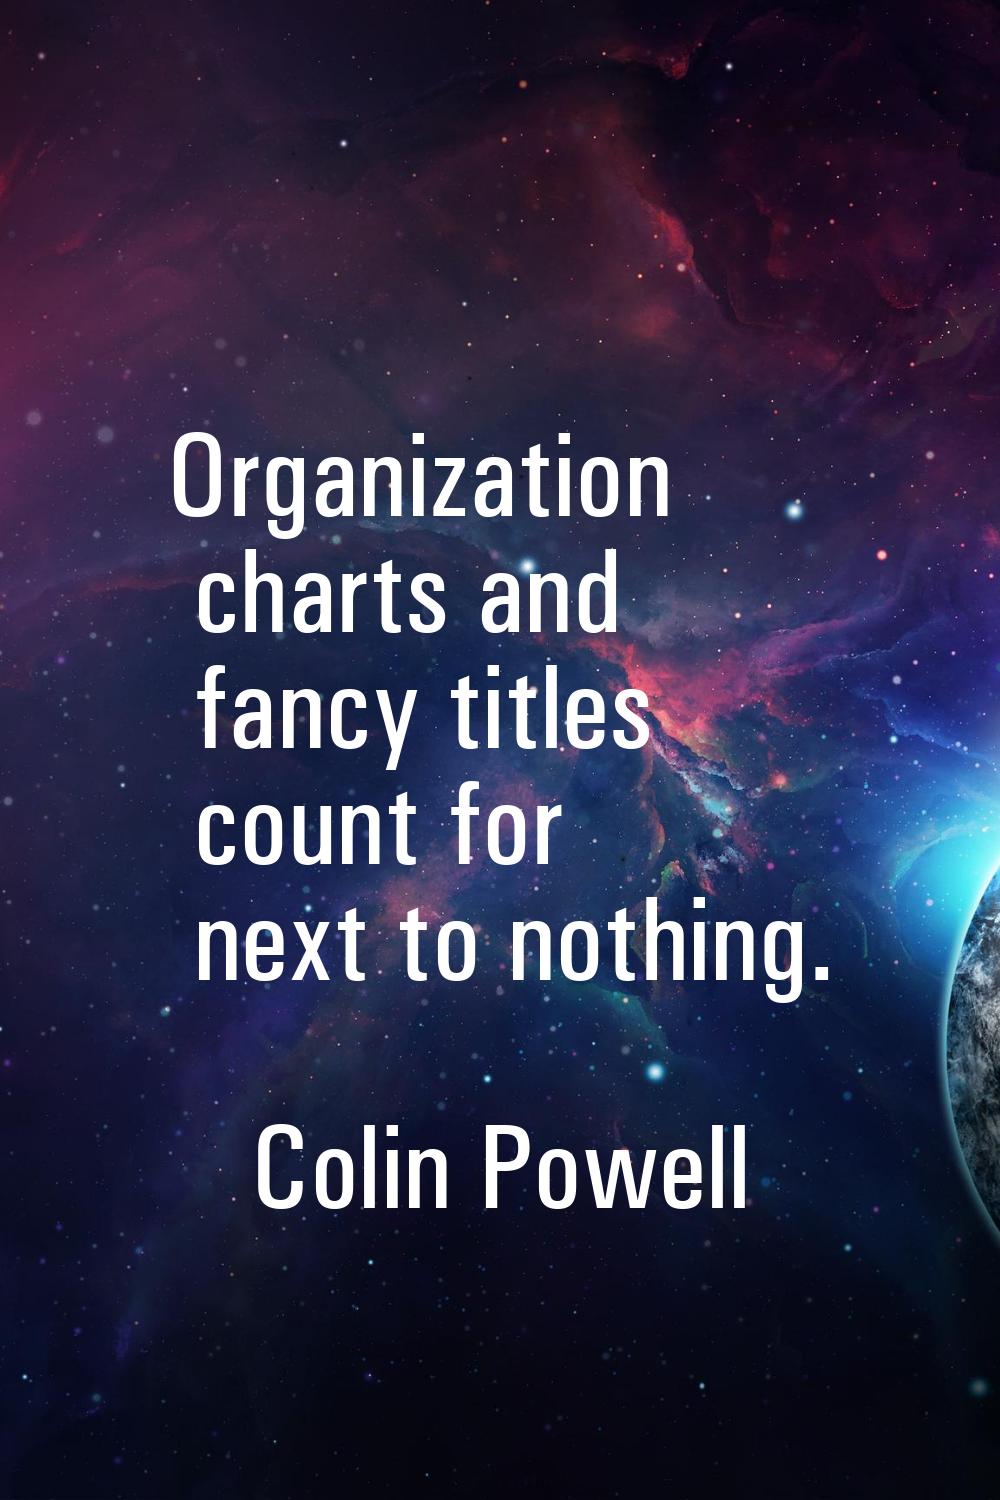 Organization charts and fancy titles count for next to nothing.